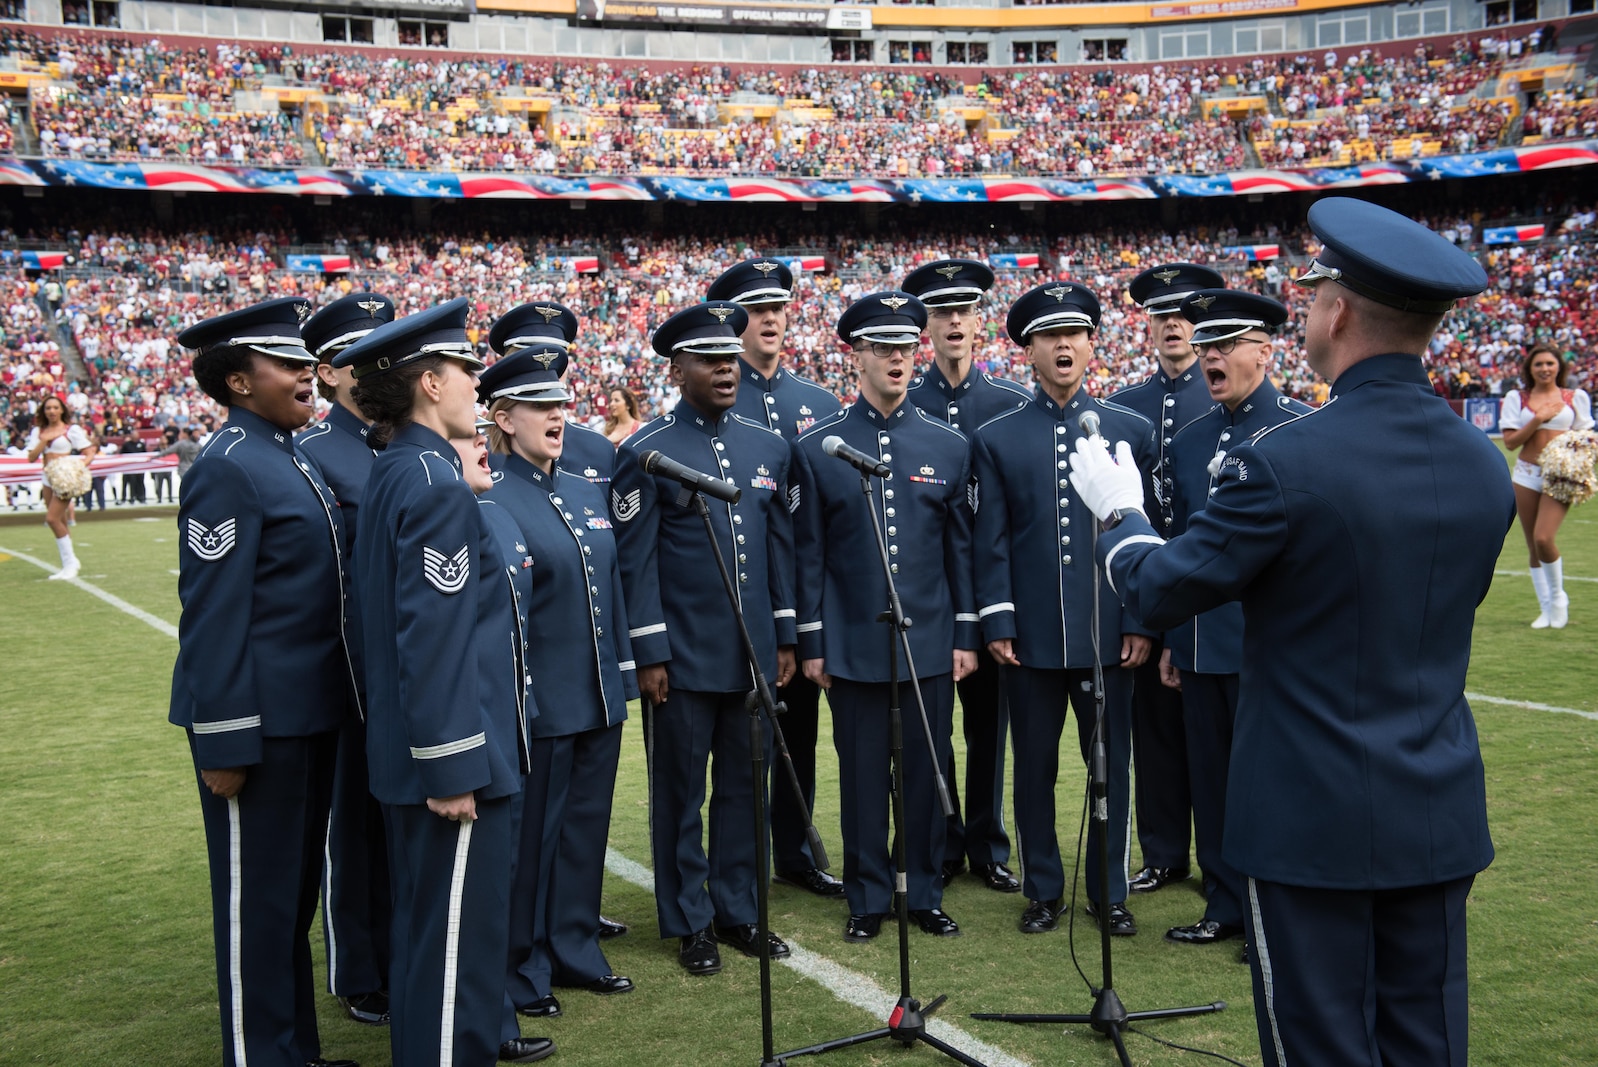 Members of the Singing Sergeants, conducted by Capt. Dustin Doyle perform the National Anthem prior to a Washington Redskins game at FedEx Field in 2017 (U.S. Air Force Photo by CMSgt Bob Kamholz/Released)